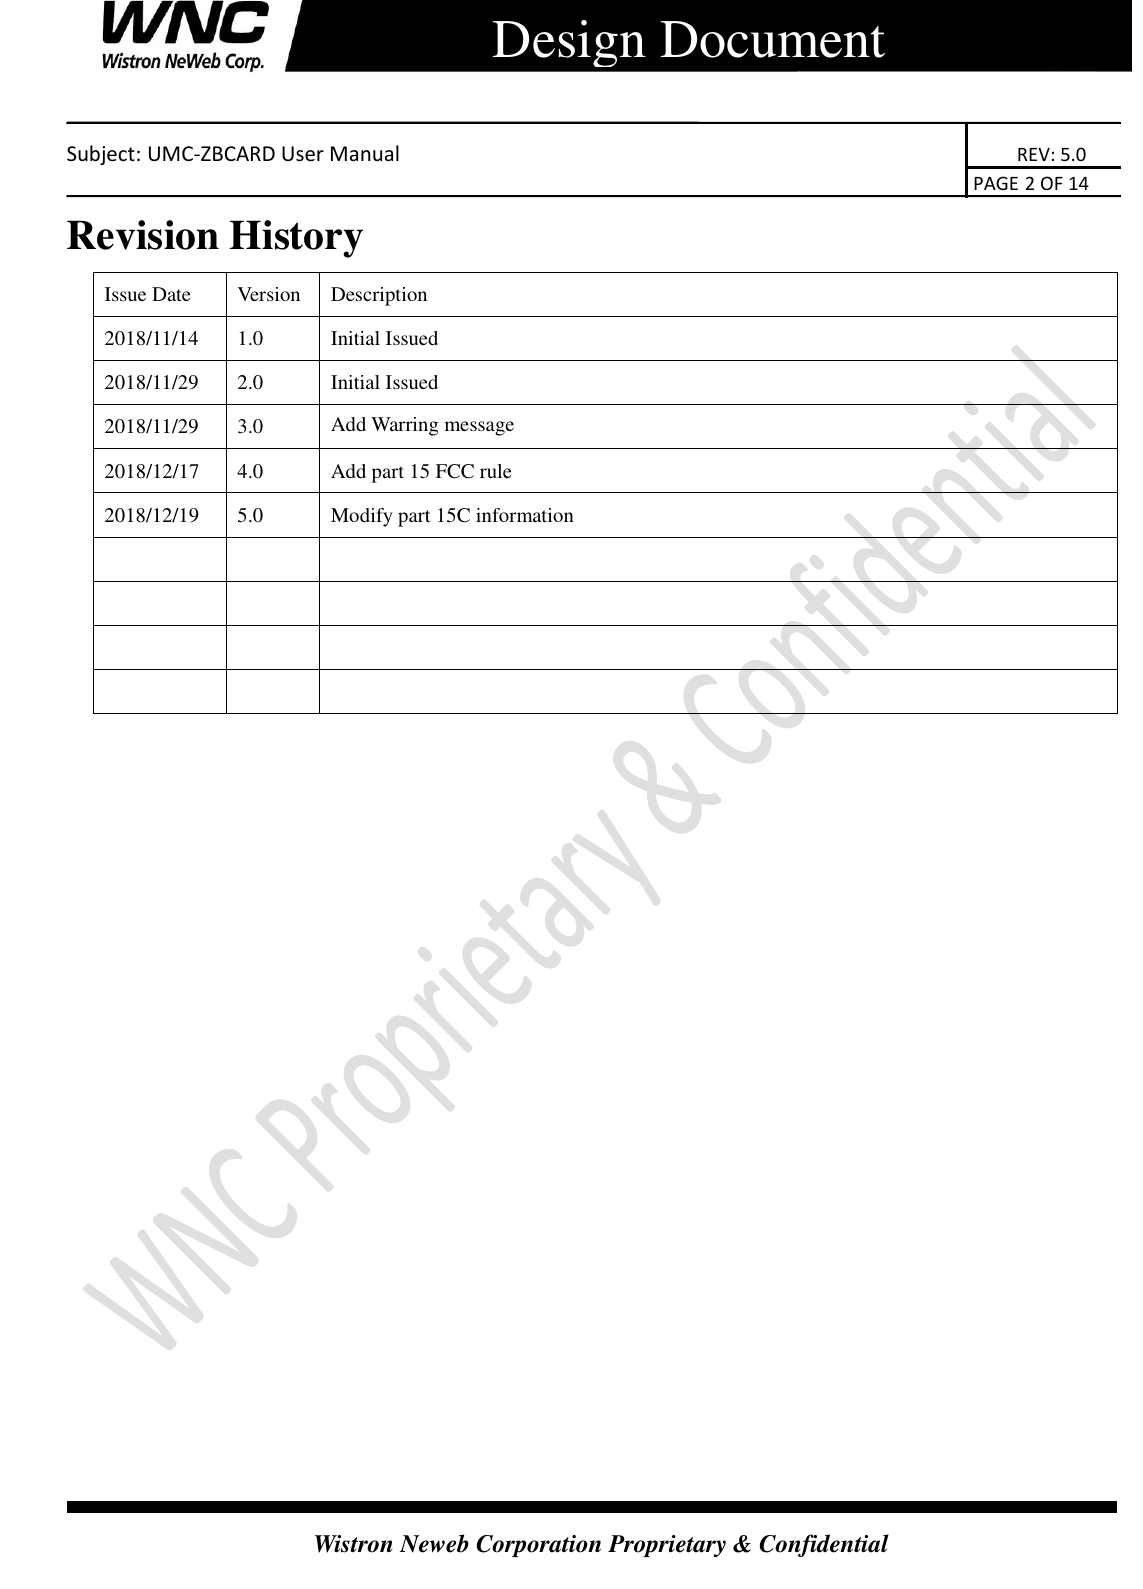    Subject: UMC-ZBCARD User Manual                                                                      REV: 5.0                                                                                        PAGE 2 OF 14  Wistron Neweb Corporation Proprietary &amp; Confidential      Design Document Revision History Issue Date Version Description 2018/11/14 1.0 Initial Issued 2018/11/29 2.0 Initial Issued 2018/11/29 3.0 Add Warring message 2018/12/17 4.0 Add part 15 FCC rule   2018/12/19 5.0 Modify part 15C information                               